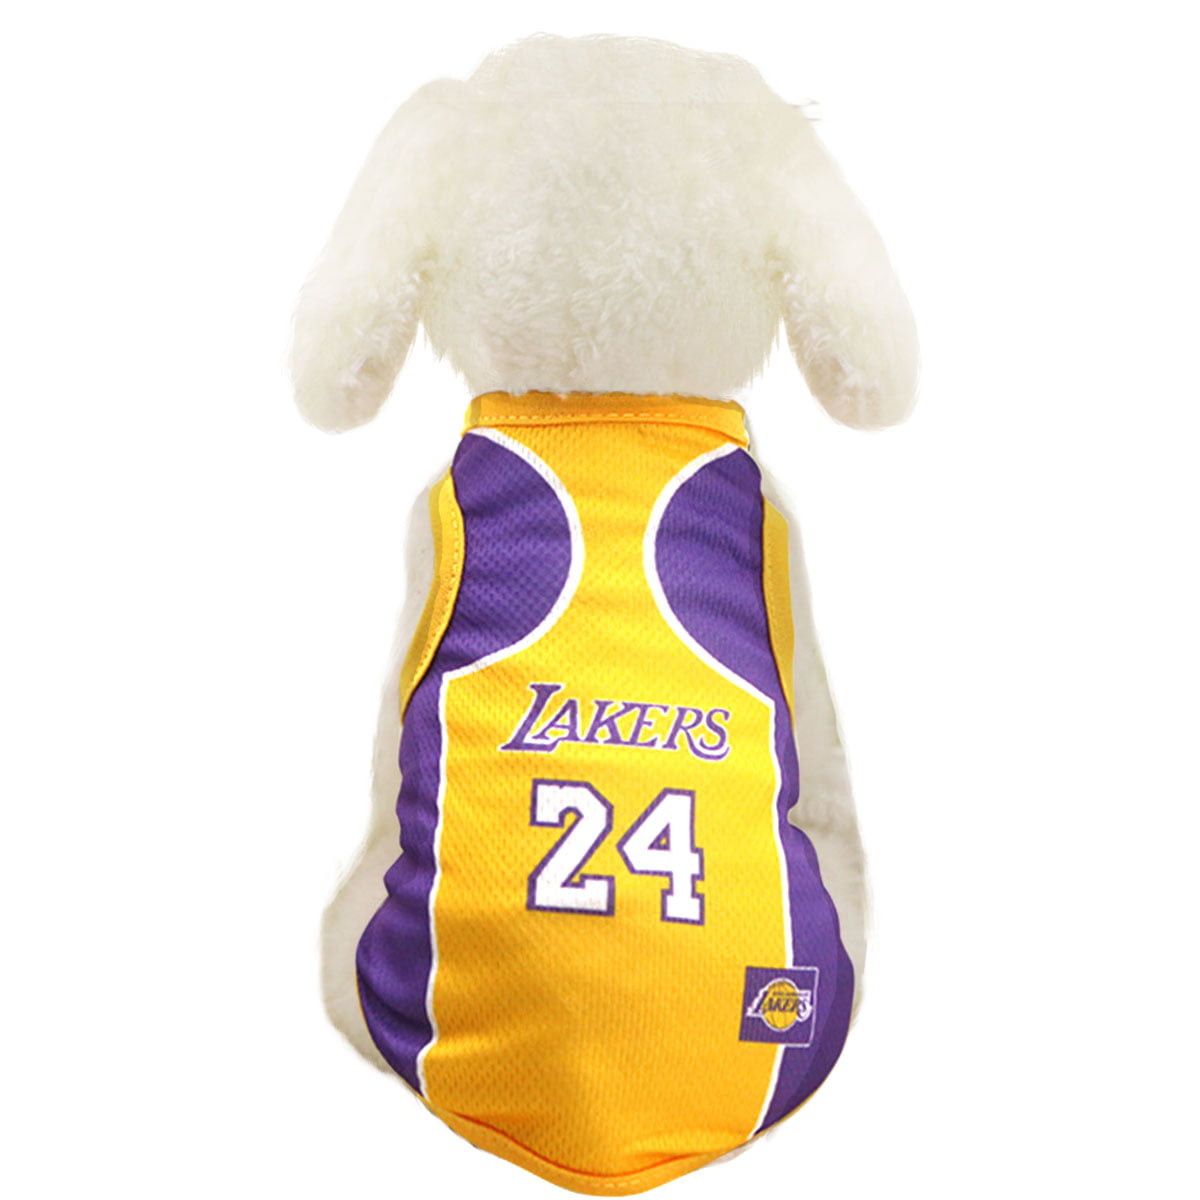 lakers 24 dog jersey